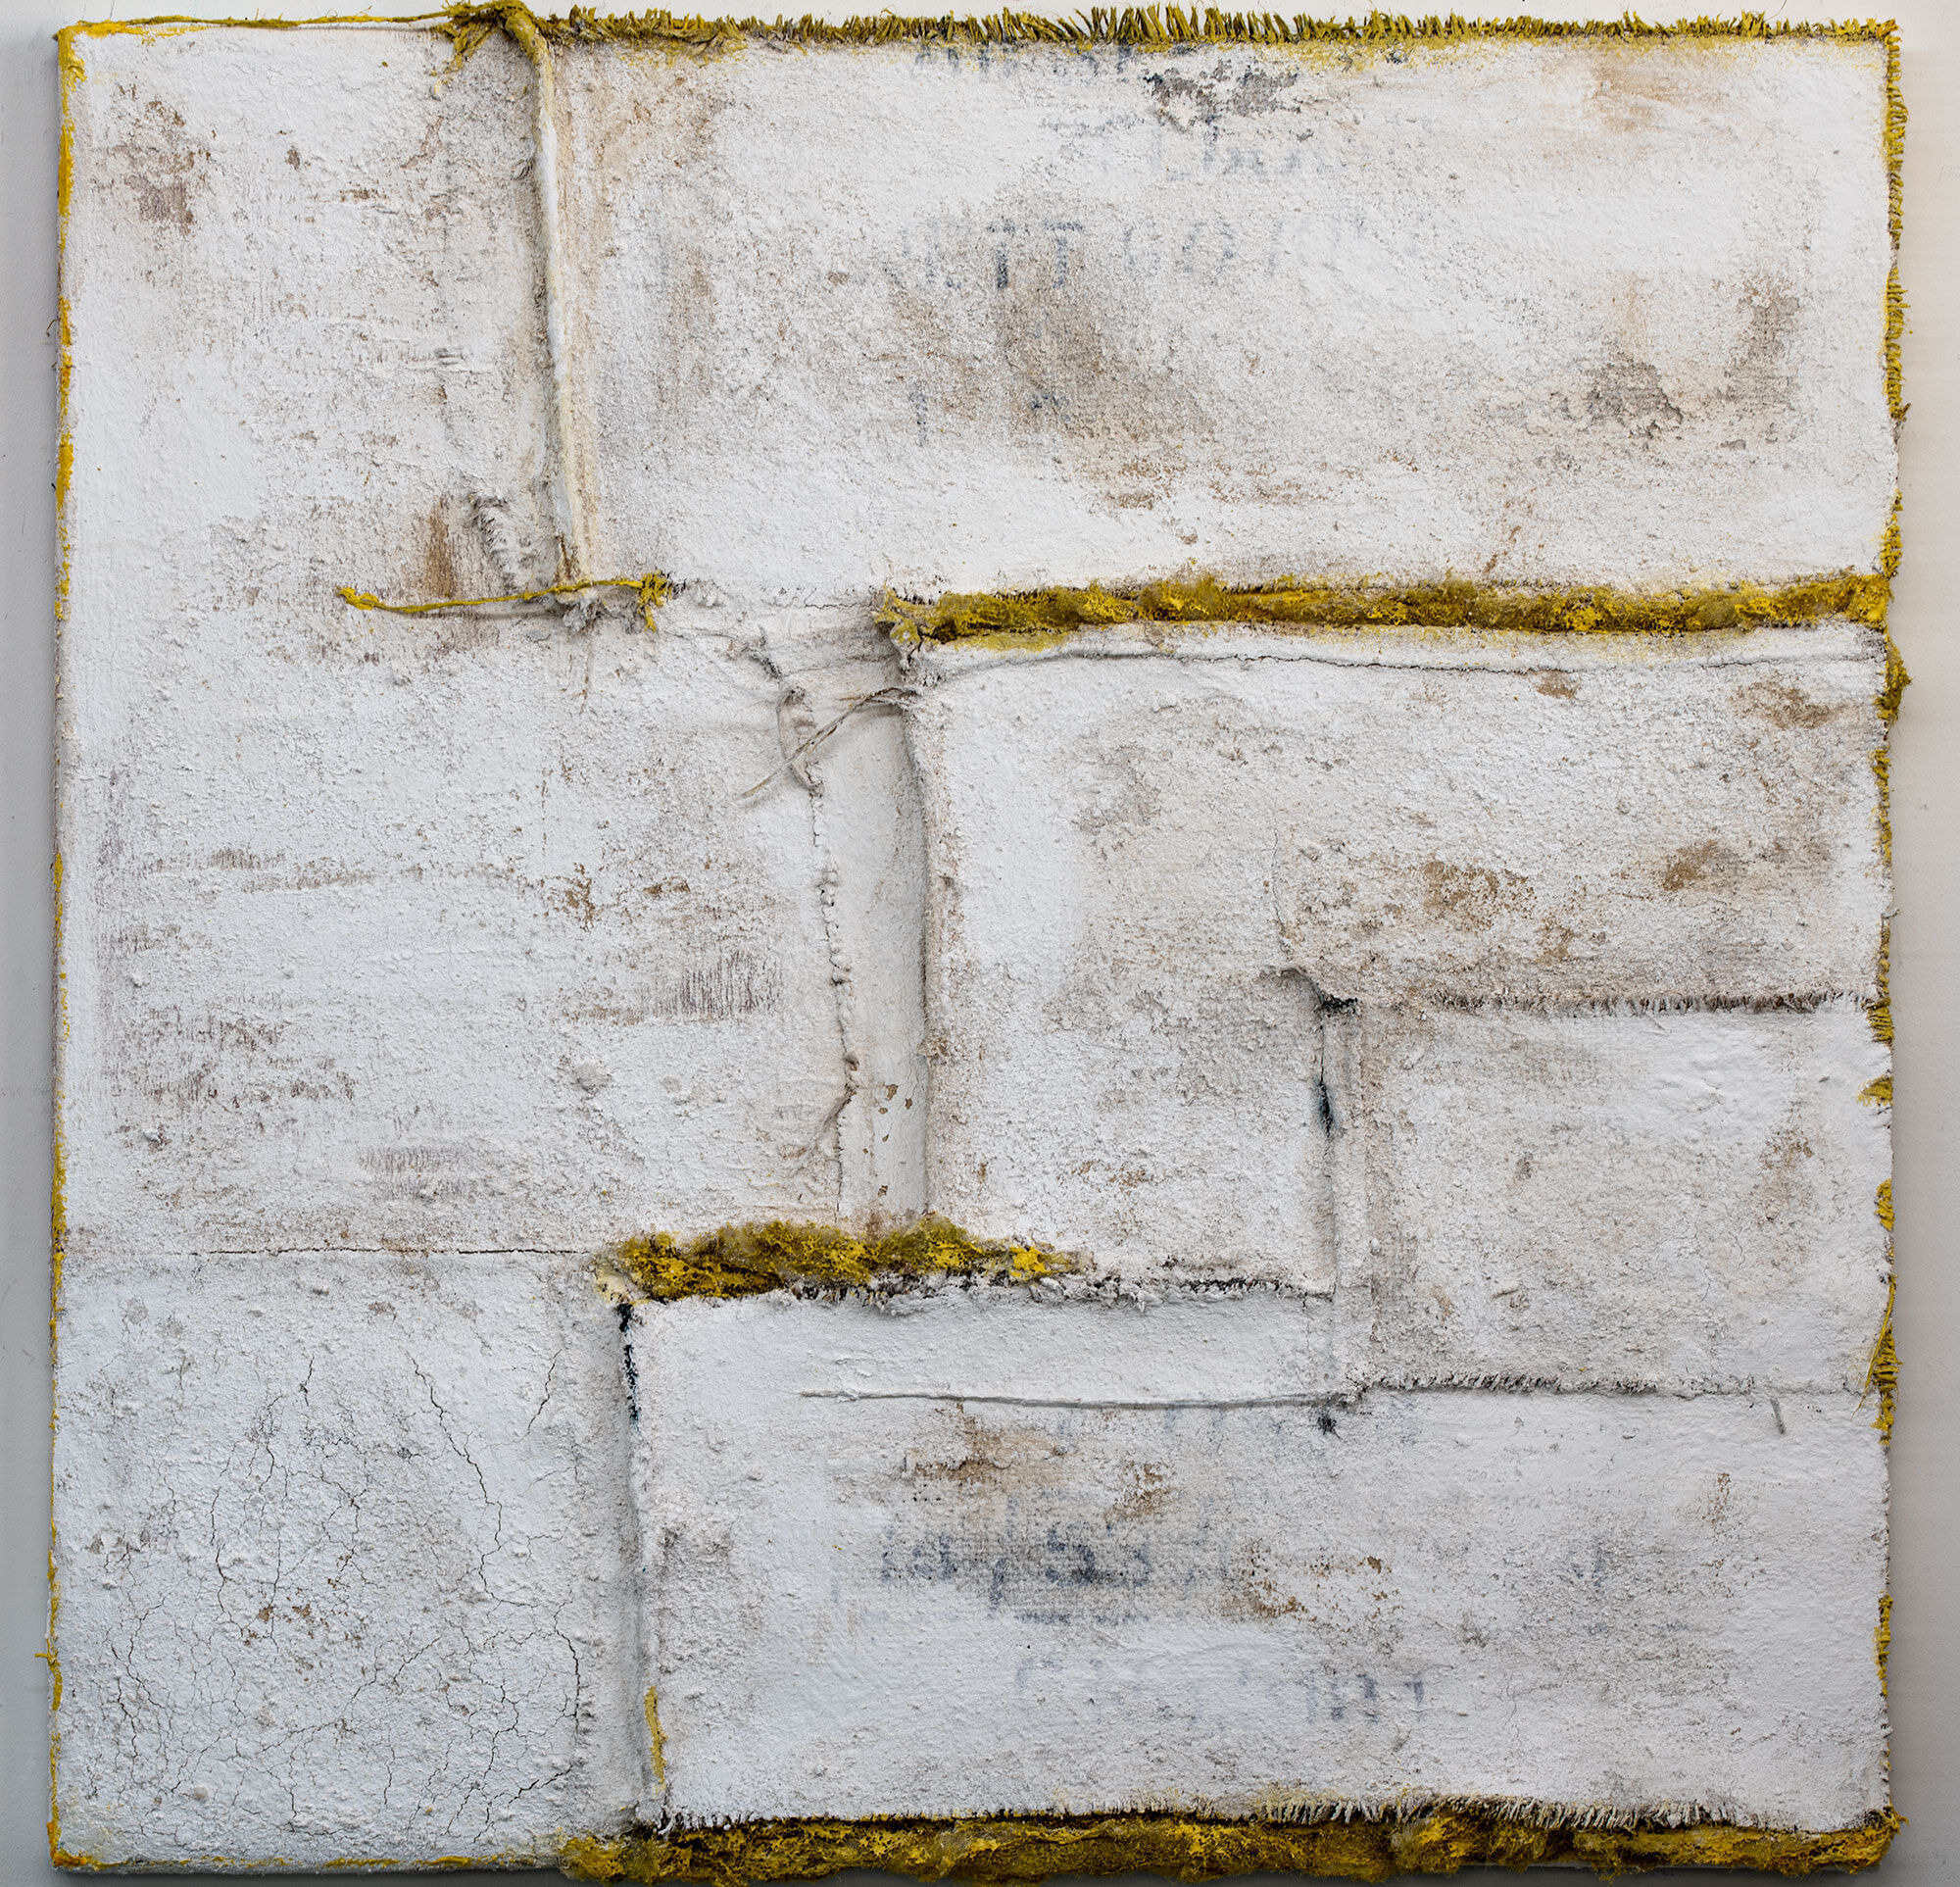 Anna-Caione-White-#13,-2018,-fabric,-pigment-&-mixed-media-on-canvas,-100cmx100cm